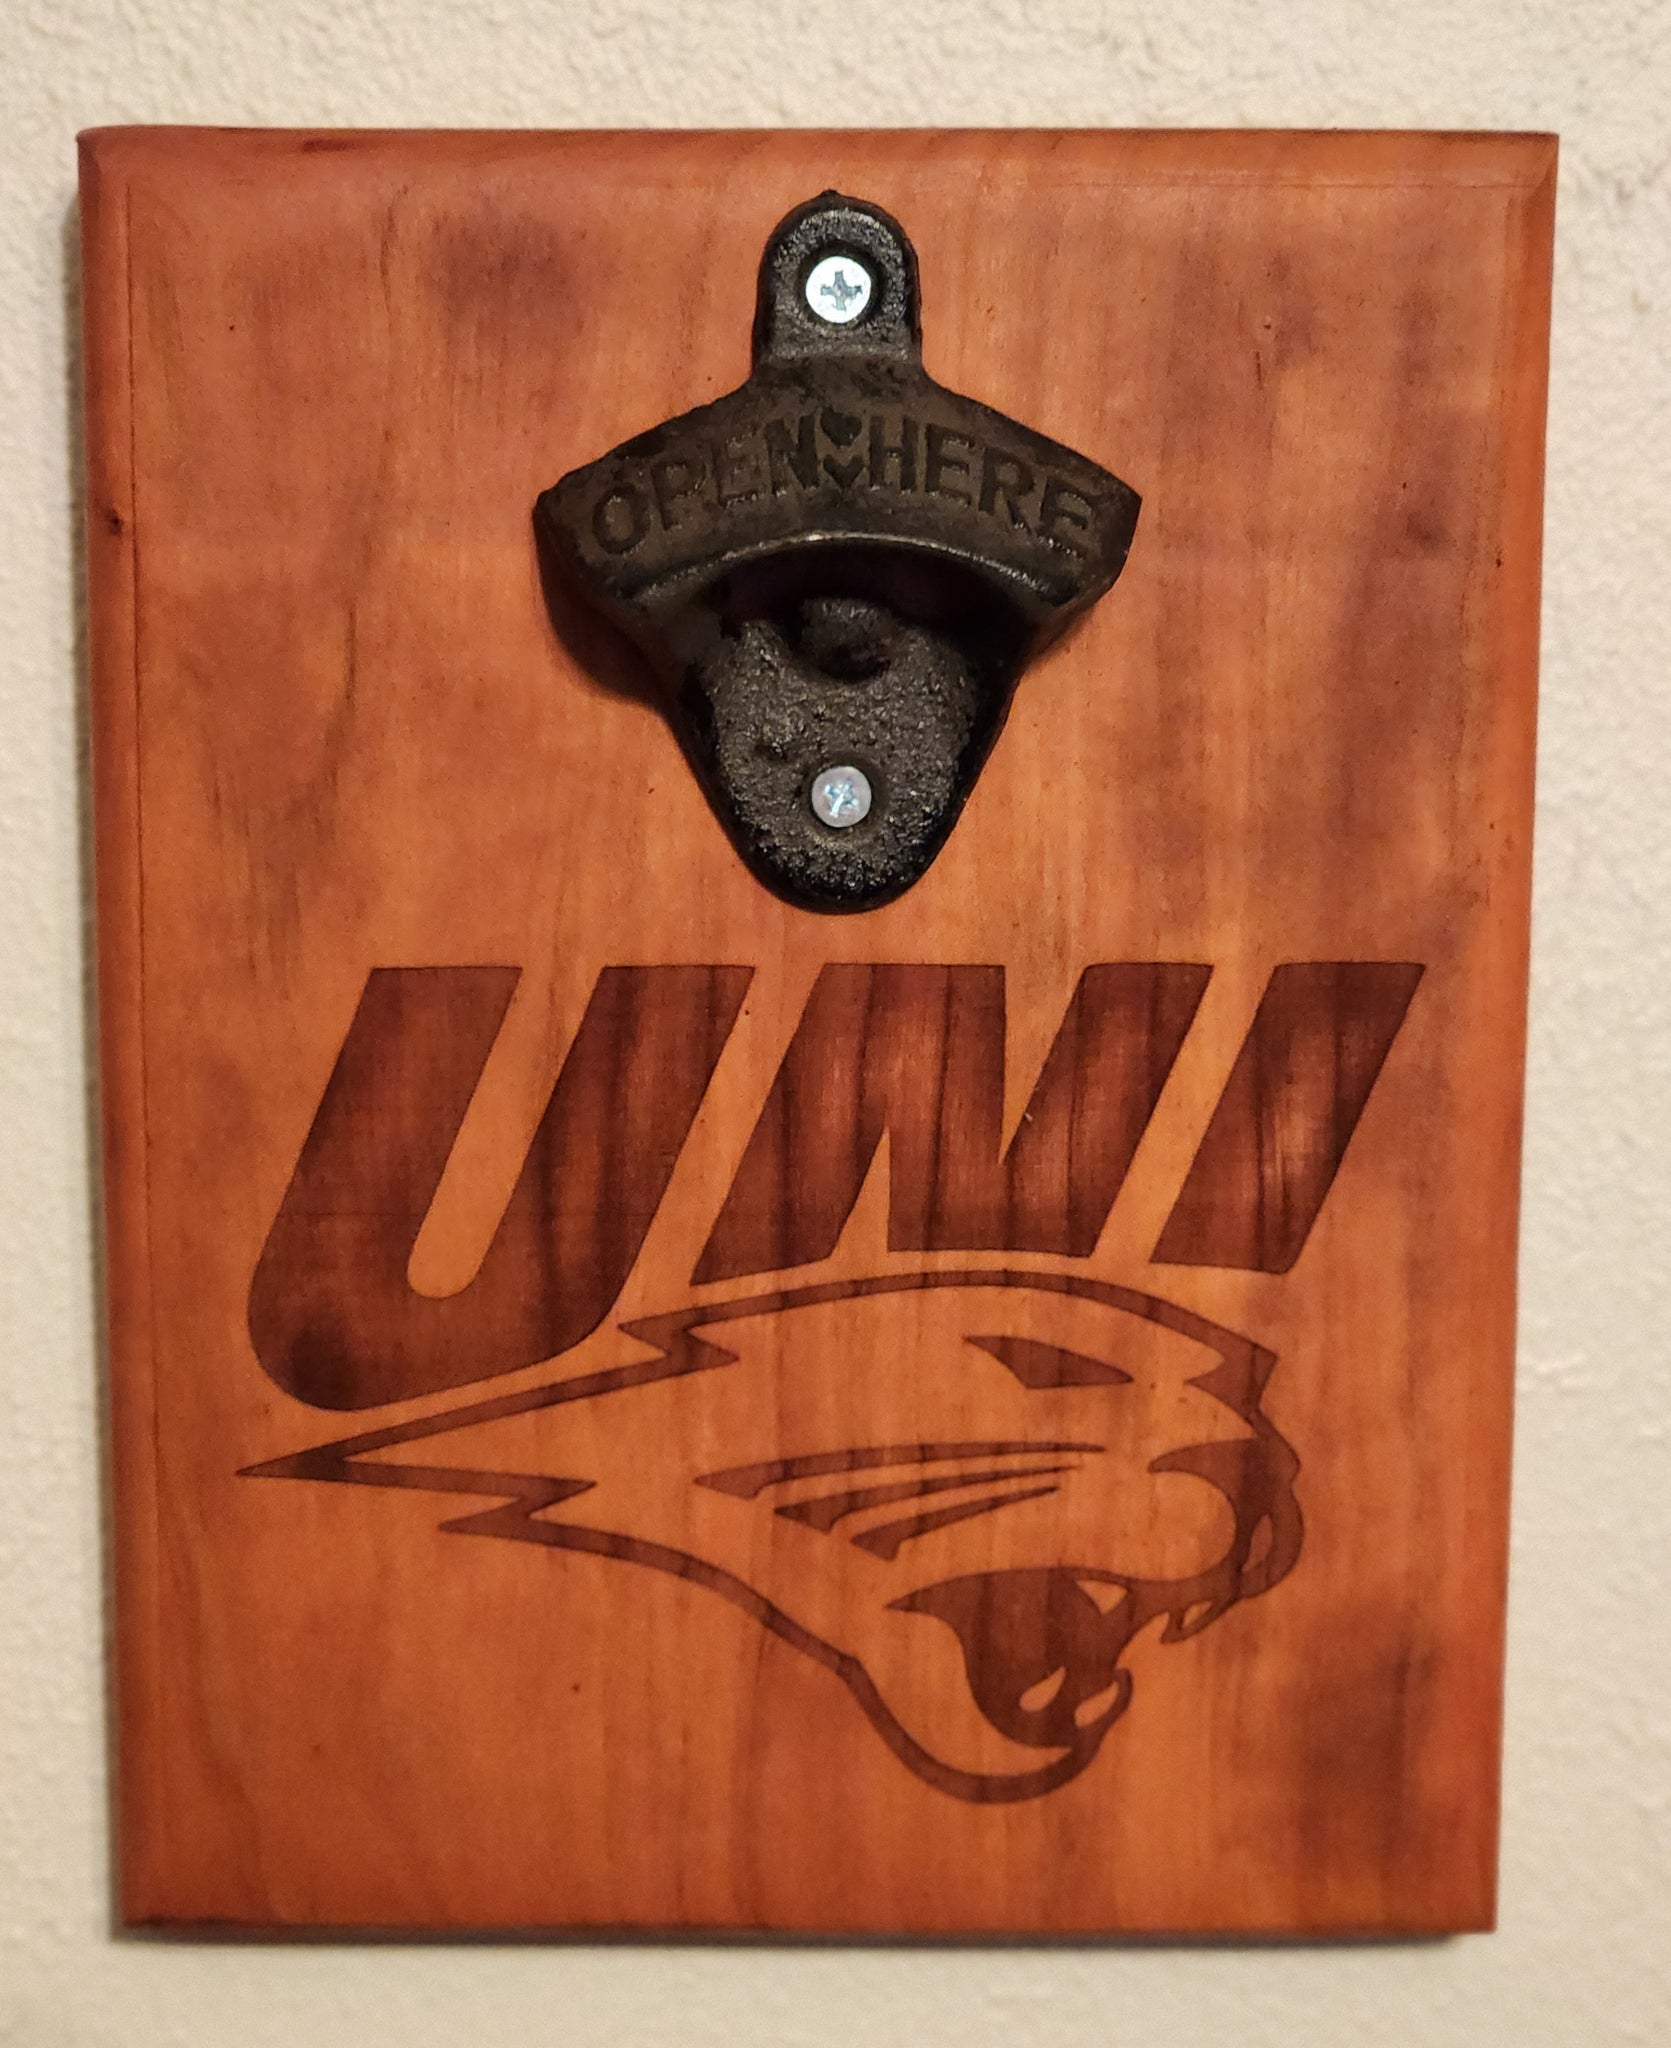 Show Your Panther Pride with Our University of Northern Iowa Bottle Opener - Perfect for Game Day or Any Day